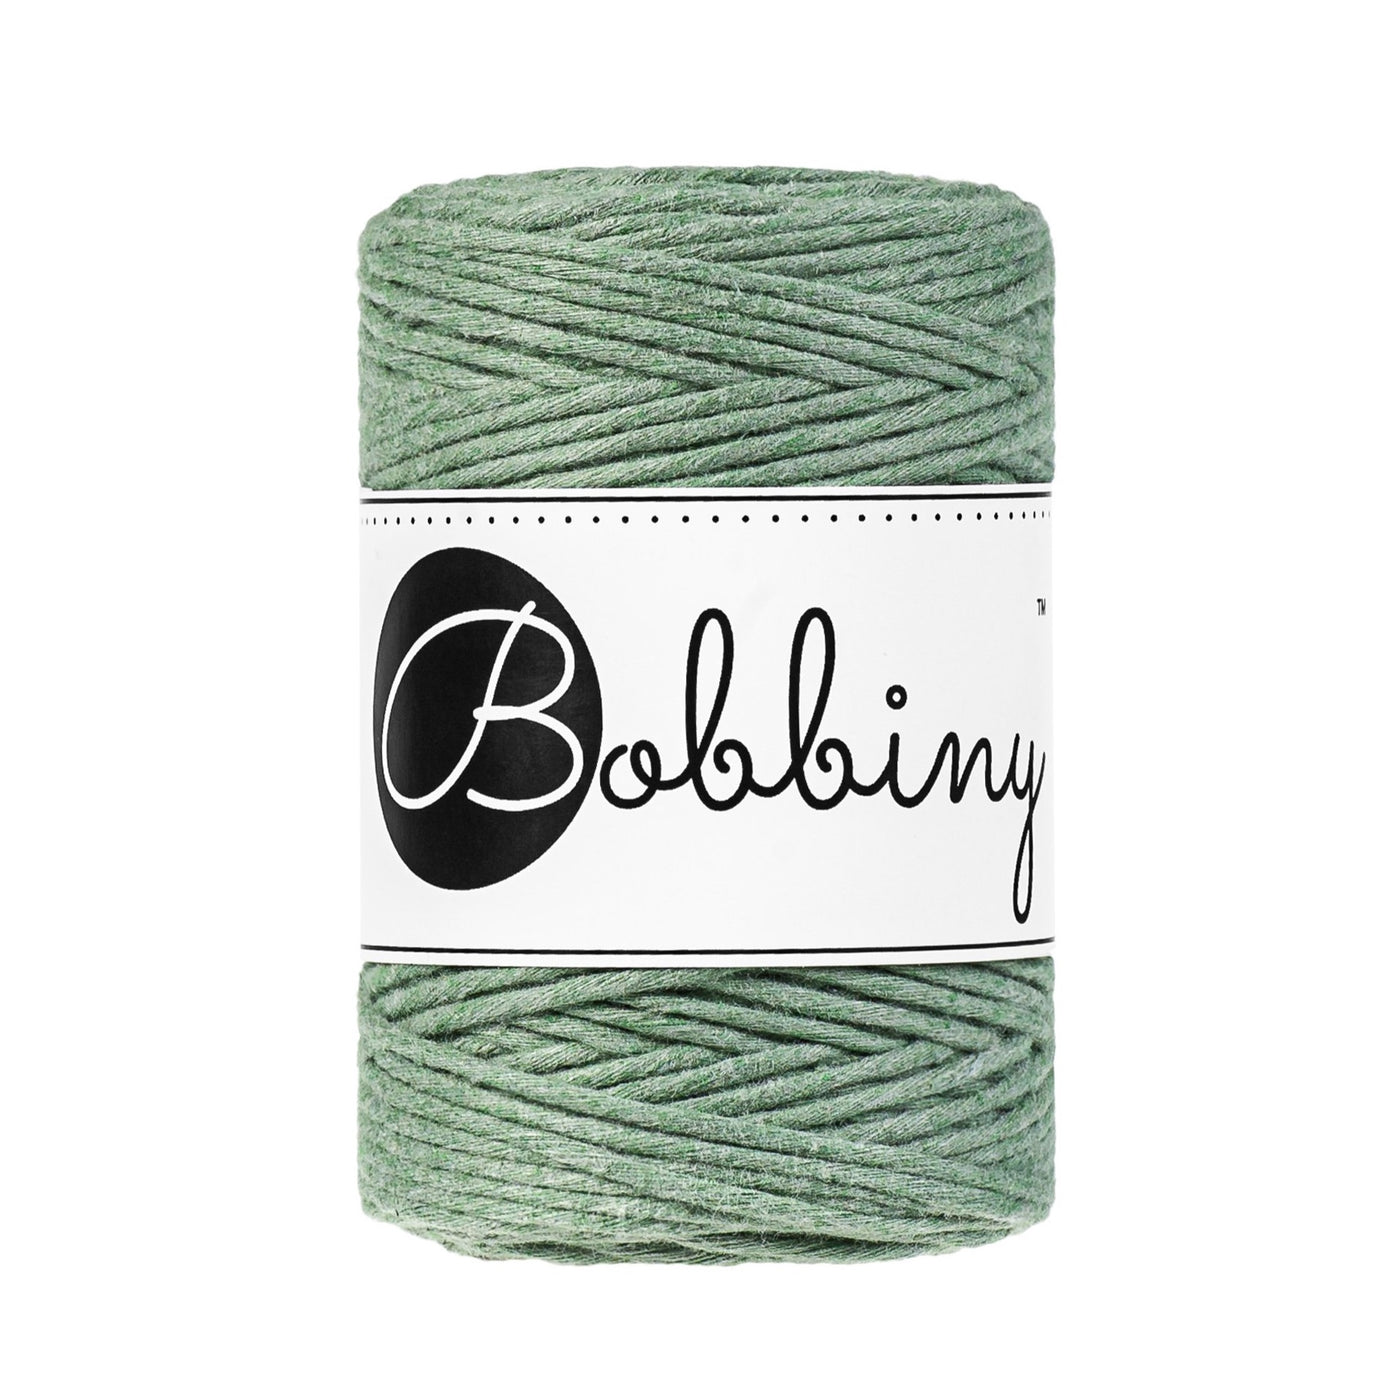 These beautiful new additions to the Bobbiny range are perfect for your mini macrame projects, earrings, weavings or any other fibre art.  This super soft cord knots beautifully and makes a wonderful fringe.  Premium Macrame Cord 1.5mm  Length: 108 yards (100m)  Weight: 160gms  ﻿Single Twist  100% recycled cotton  28 Fibres 